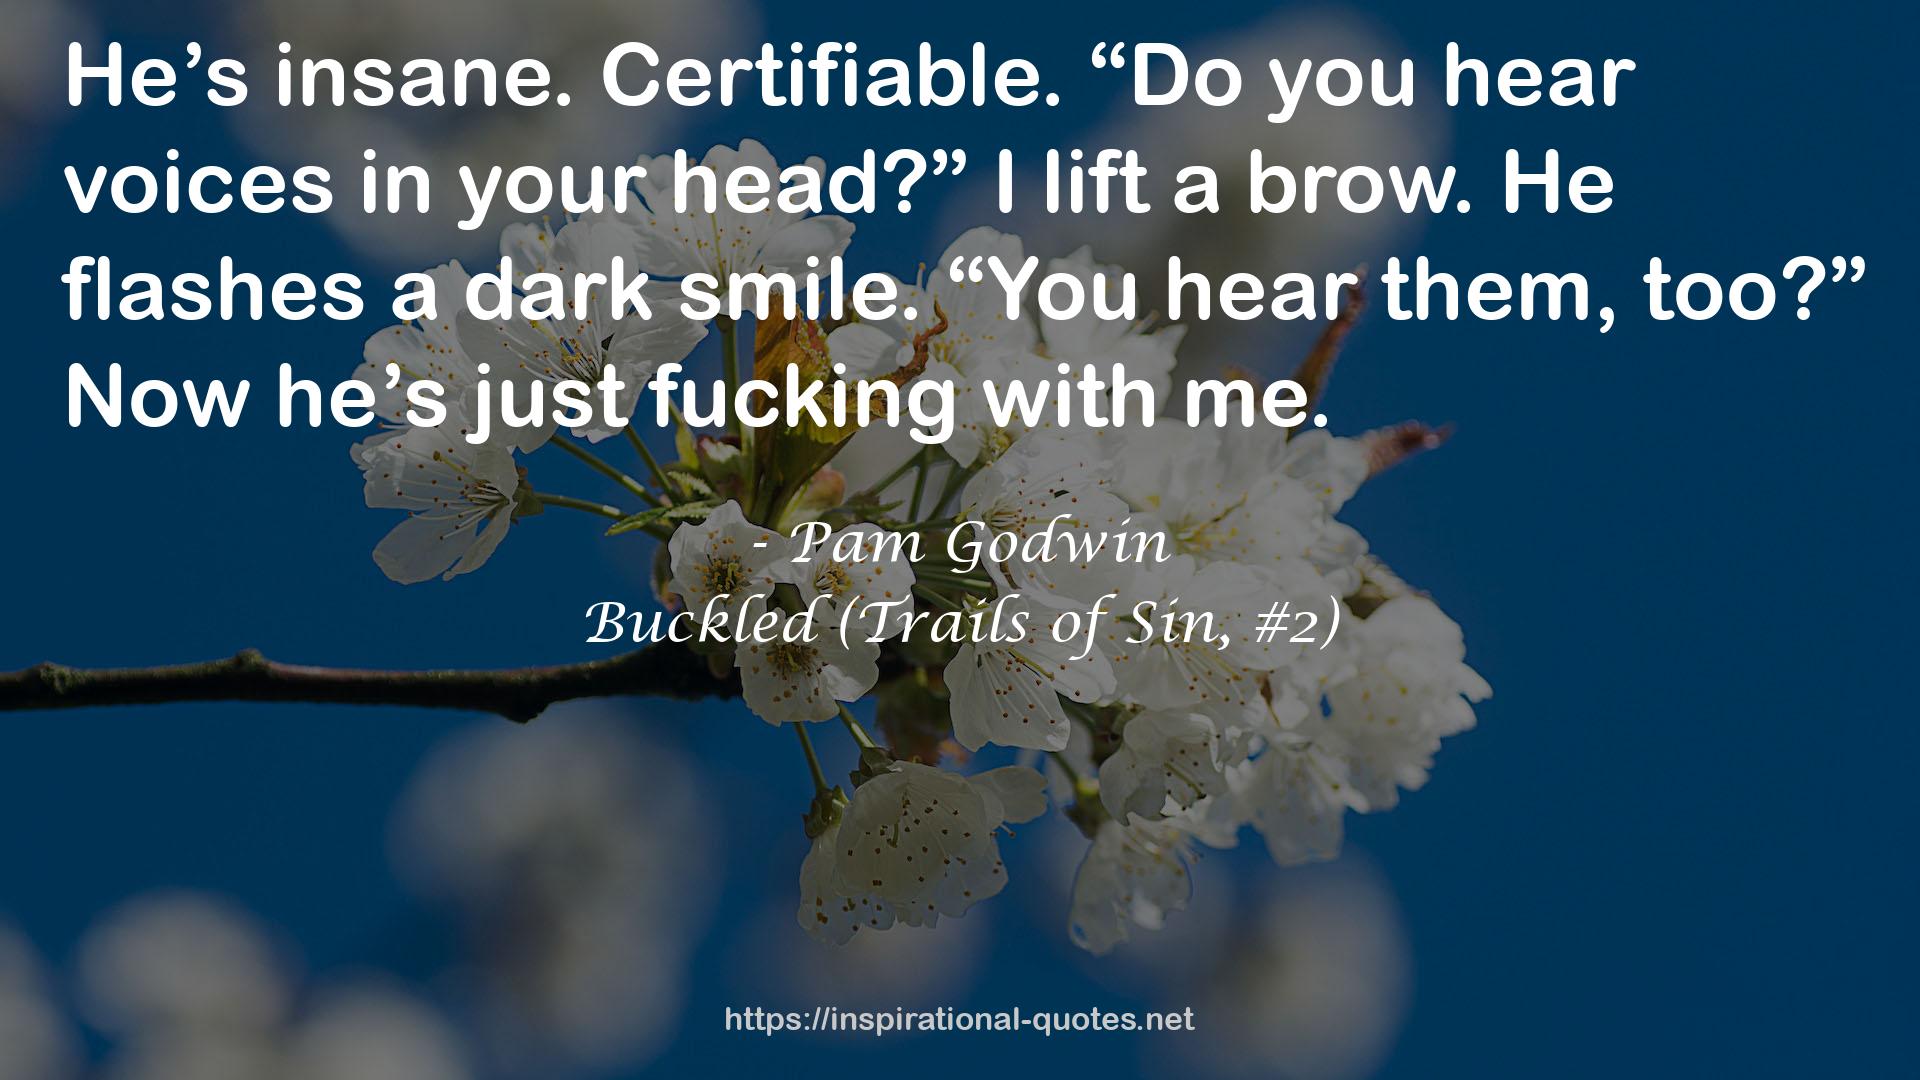 Buckled (Trails of Sin, #2) QUOTES